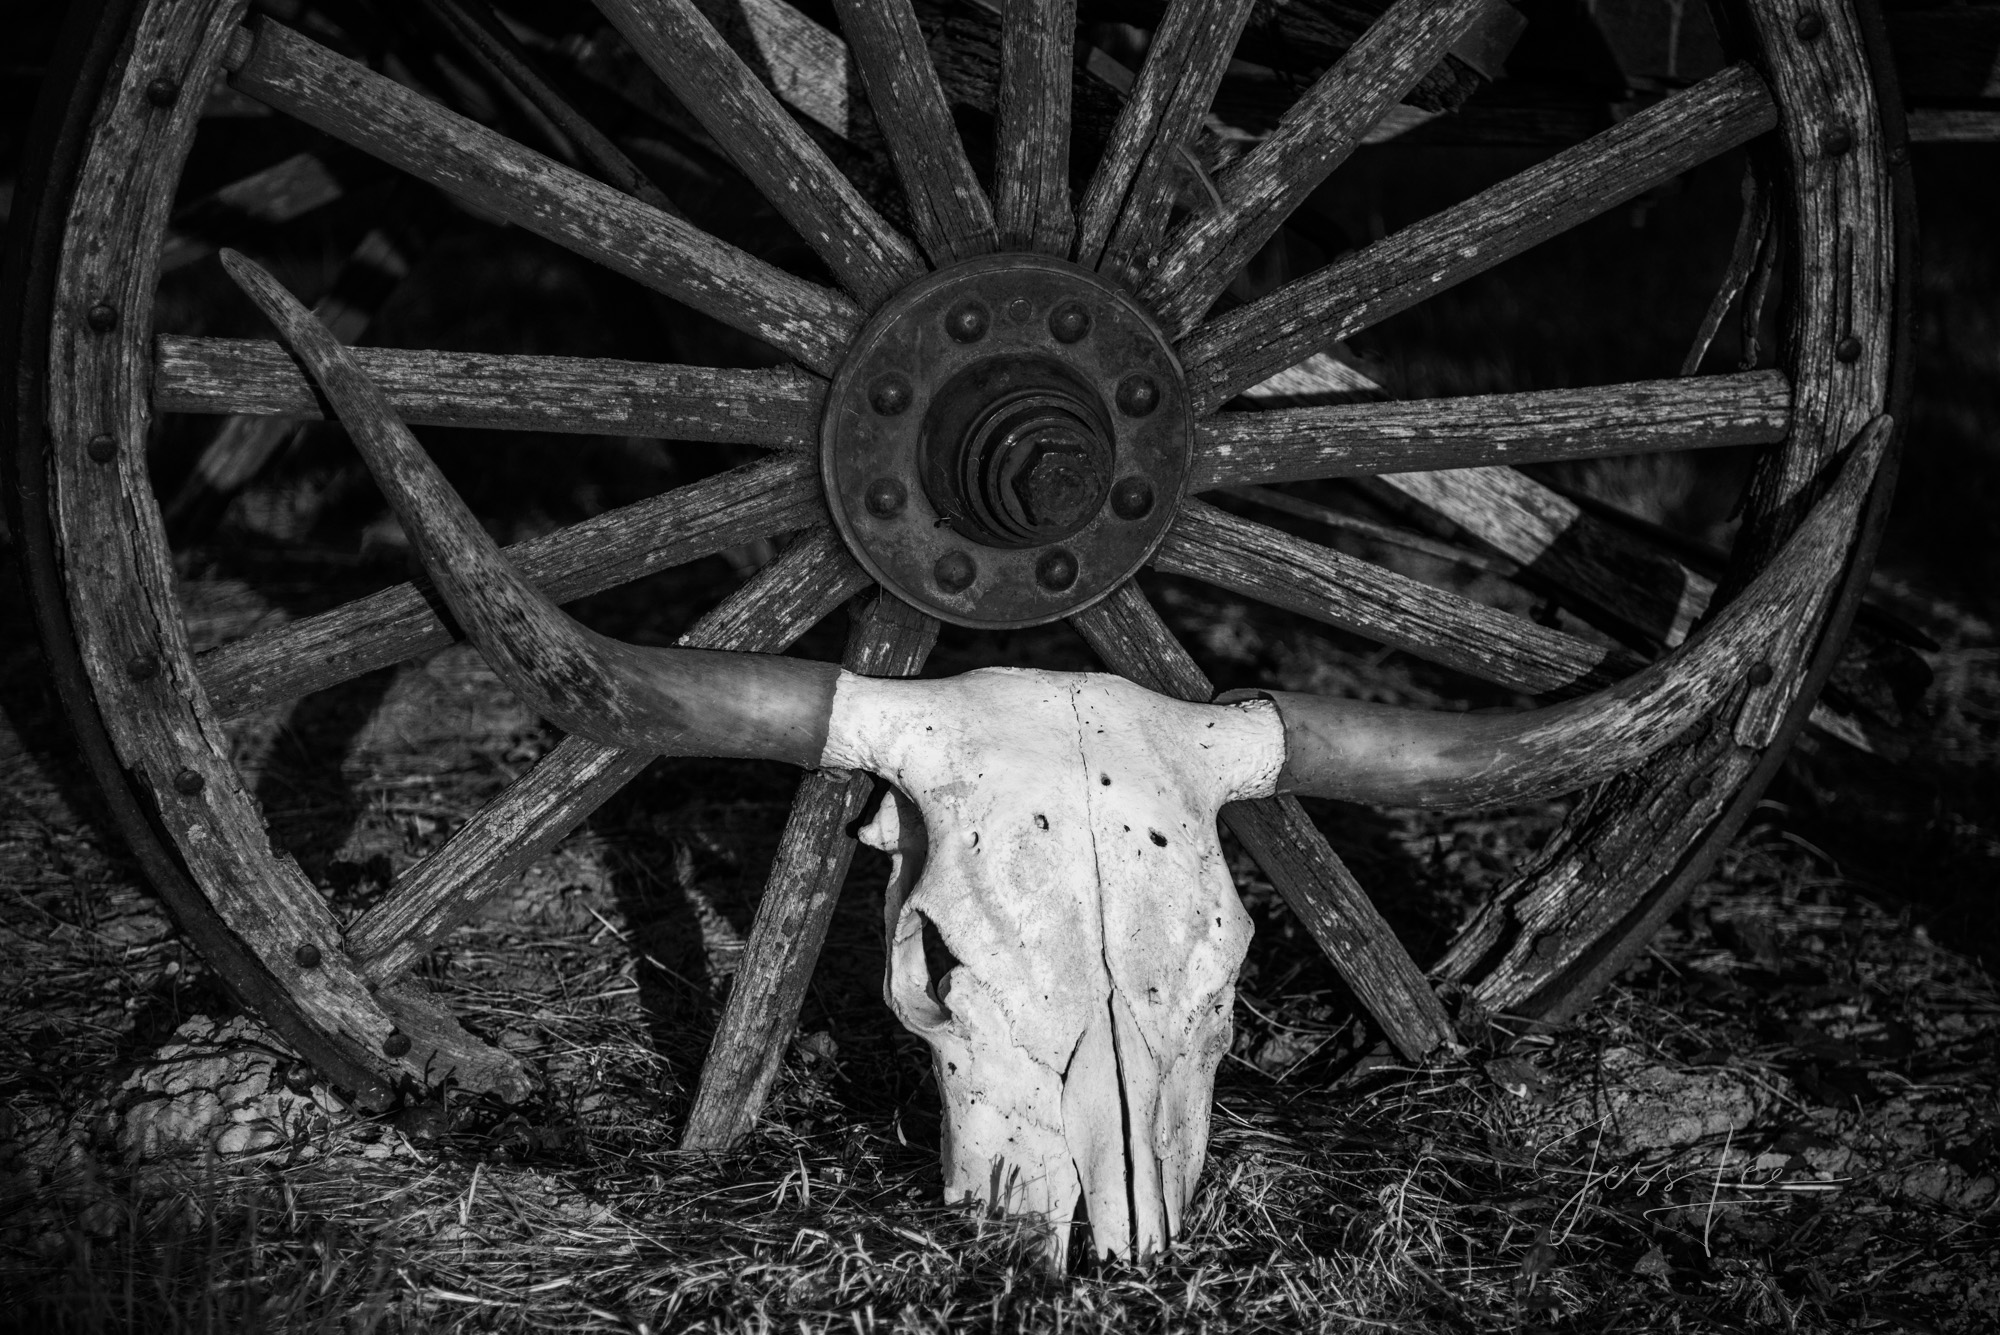 Fine Art Limited Edition Photo Prints of Cowboys, Horses, and life in the West.  Times Past. A  Cowboy picture in black and white...